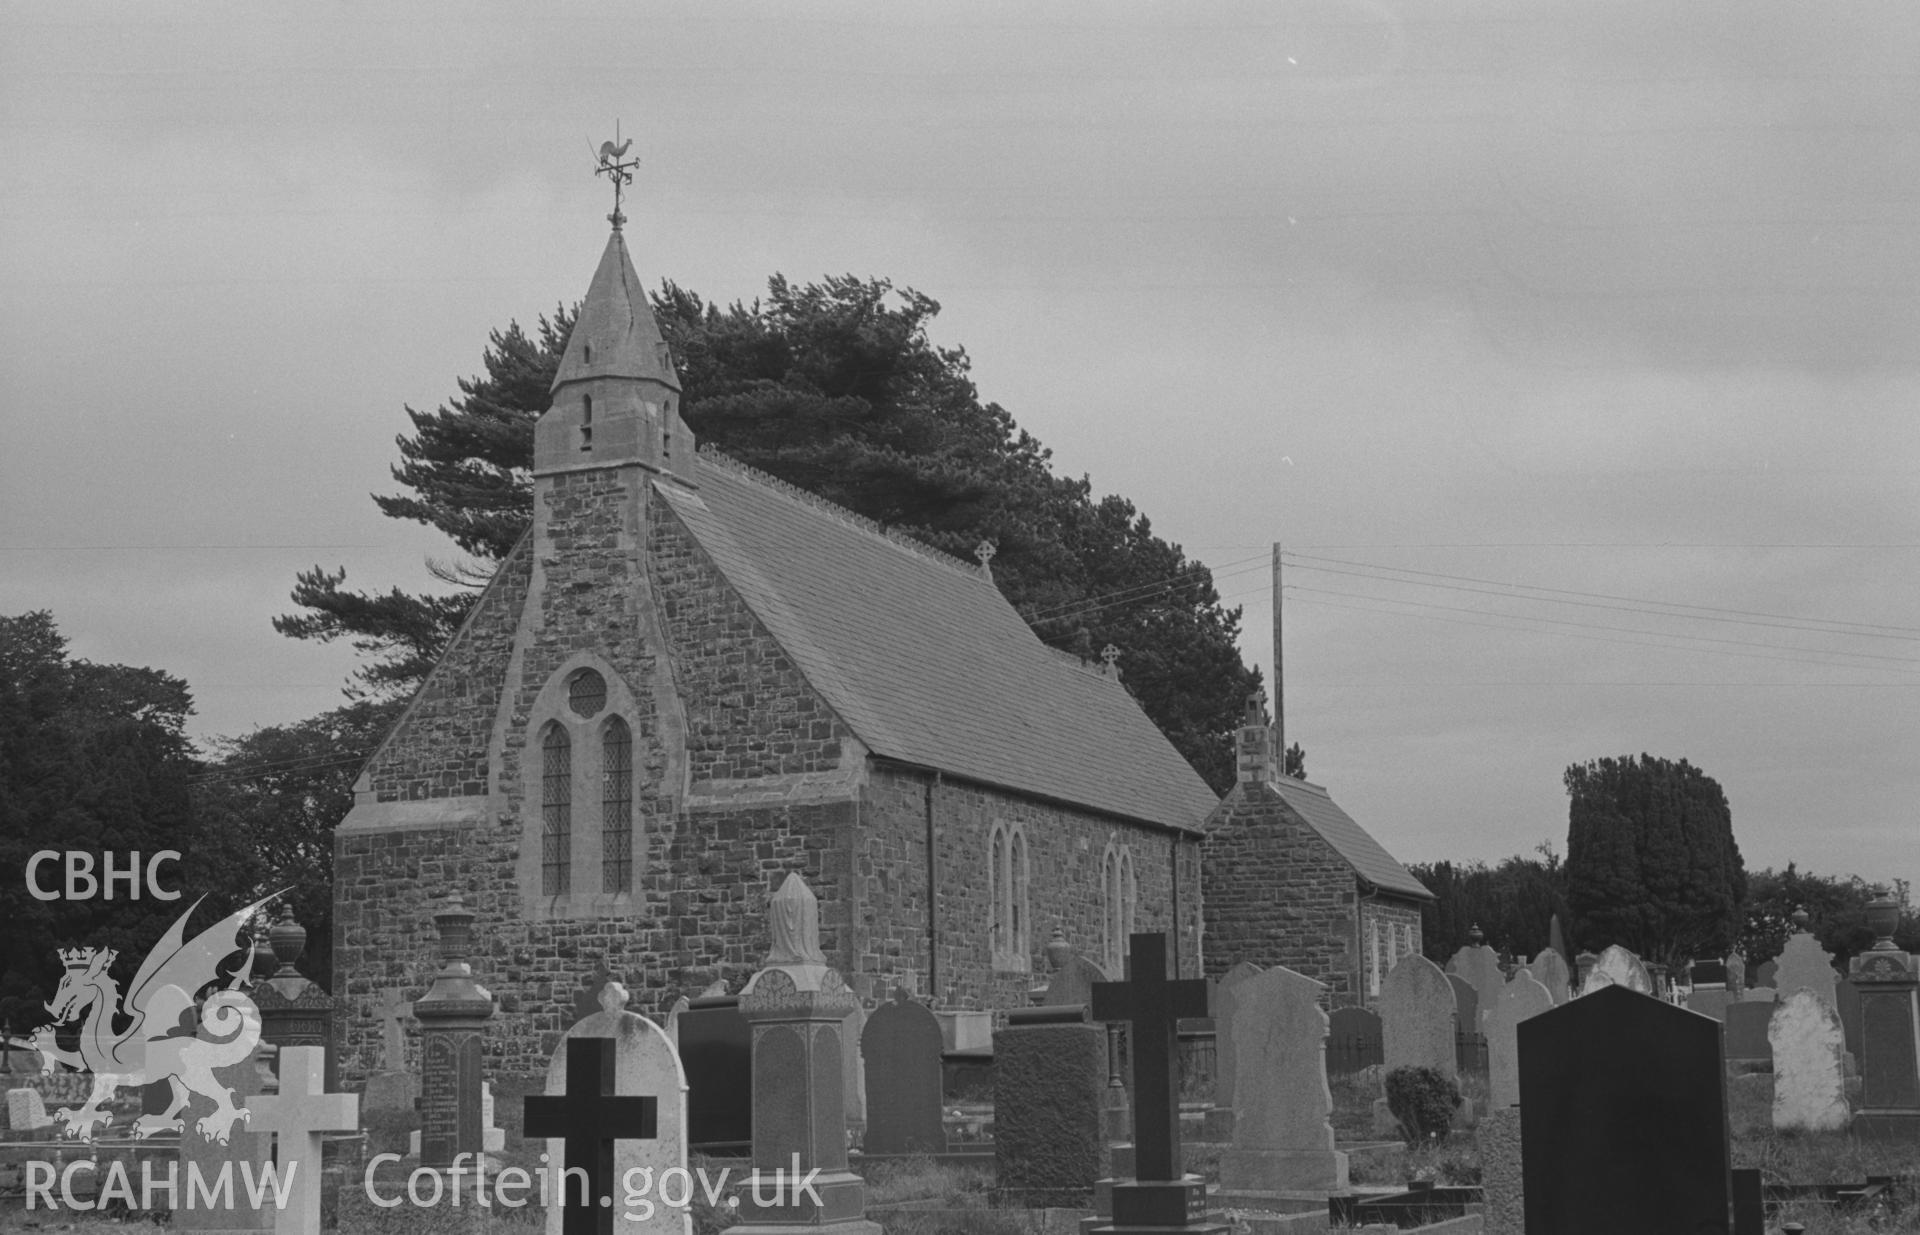 Digital copy of a black and white negative showing exterior view of St. David's Church and graveyard, Henfynyw, Aberaeron. Photographed by Arthur O. Chater on 5th September 1966 looking north east from Grid Reference SN 447 613.